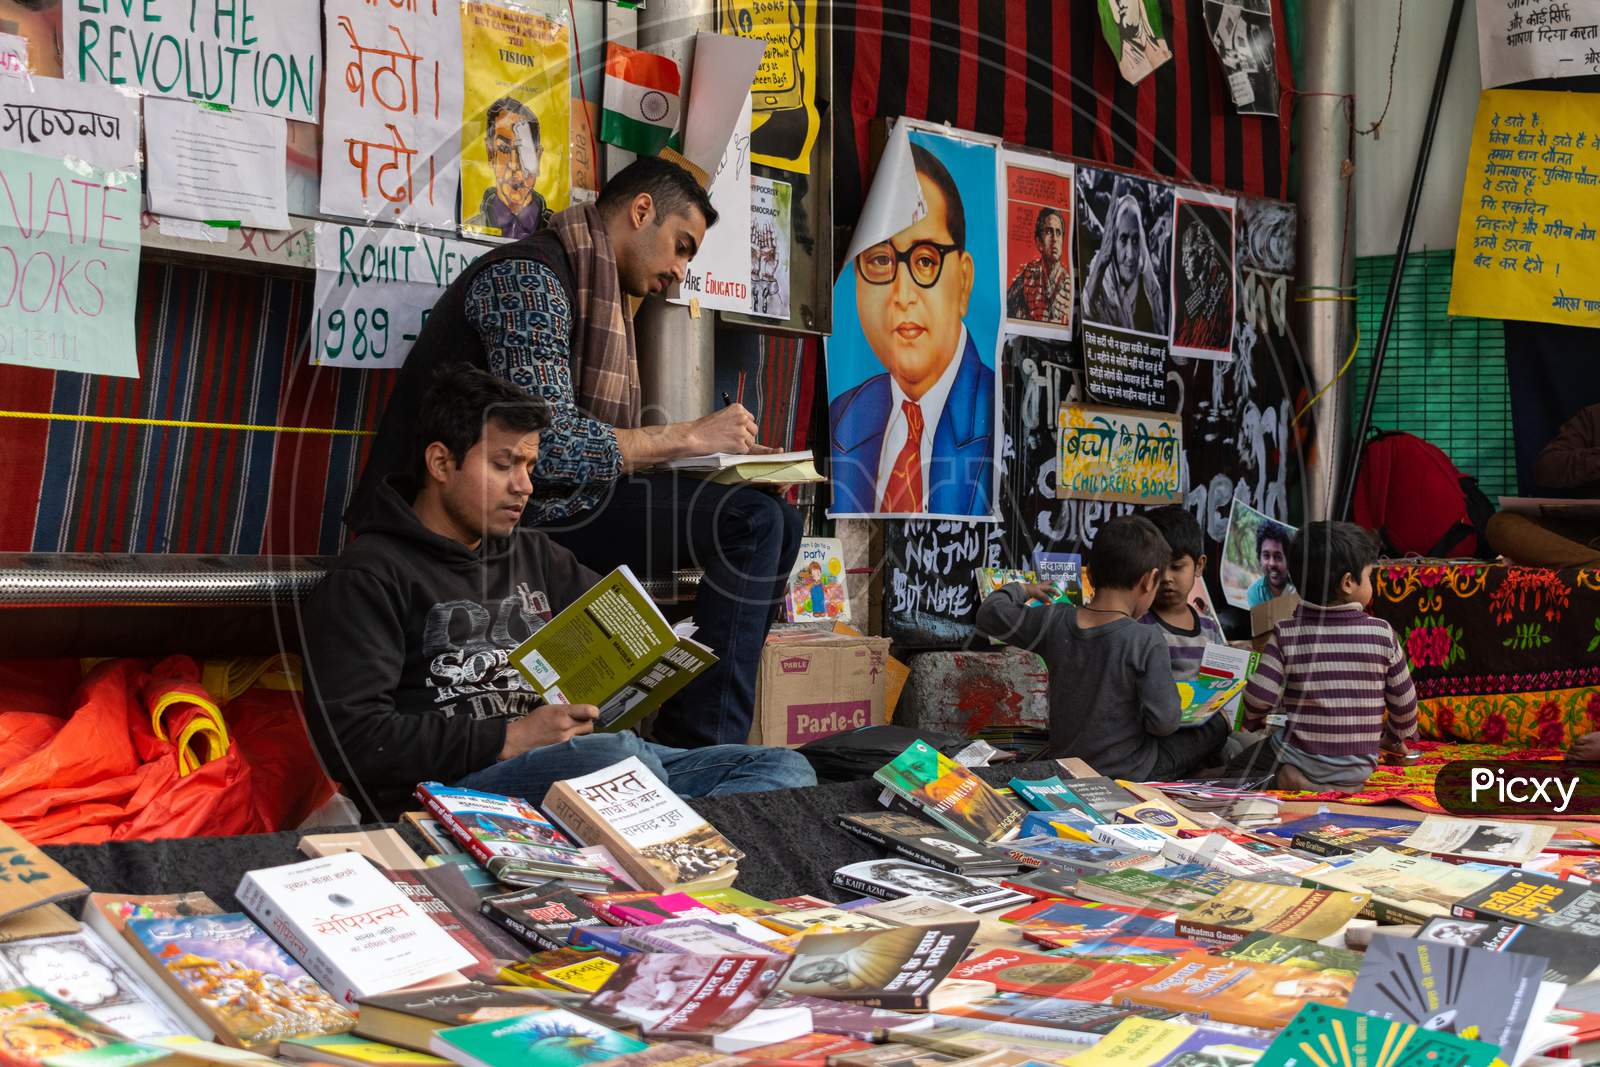 A library setup by protesters at Shaheen Bagh, protesting against Citizenship Amendment Act Caa National Register Of Citizens Nrc And National Population Register Npr